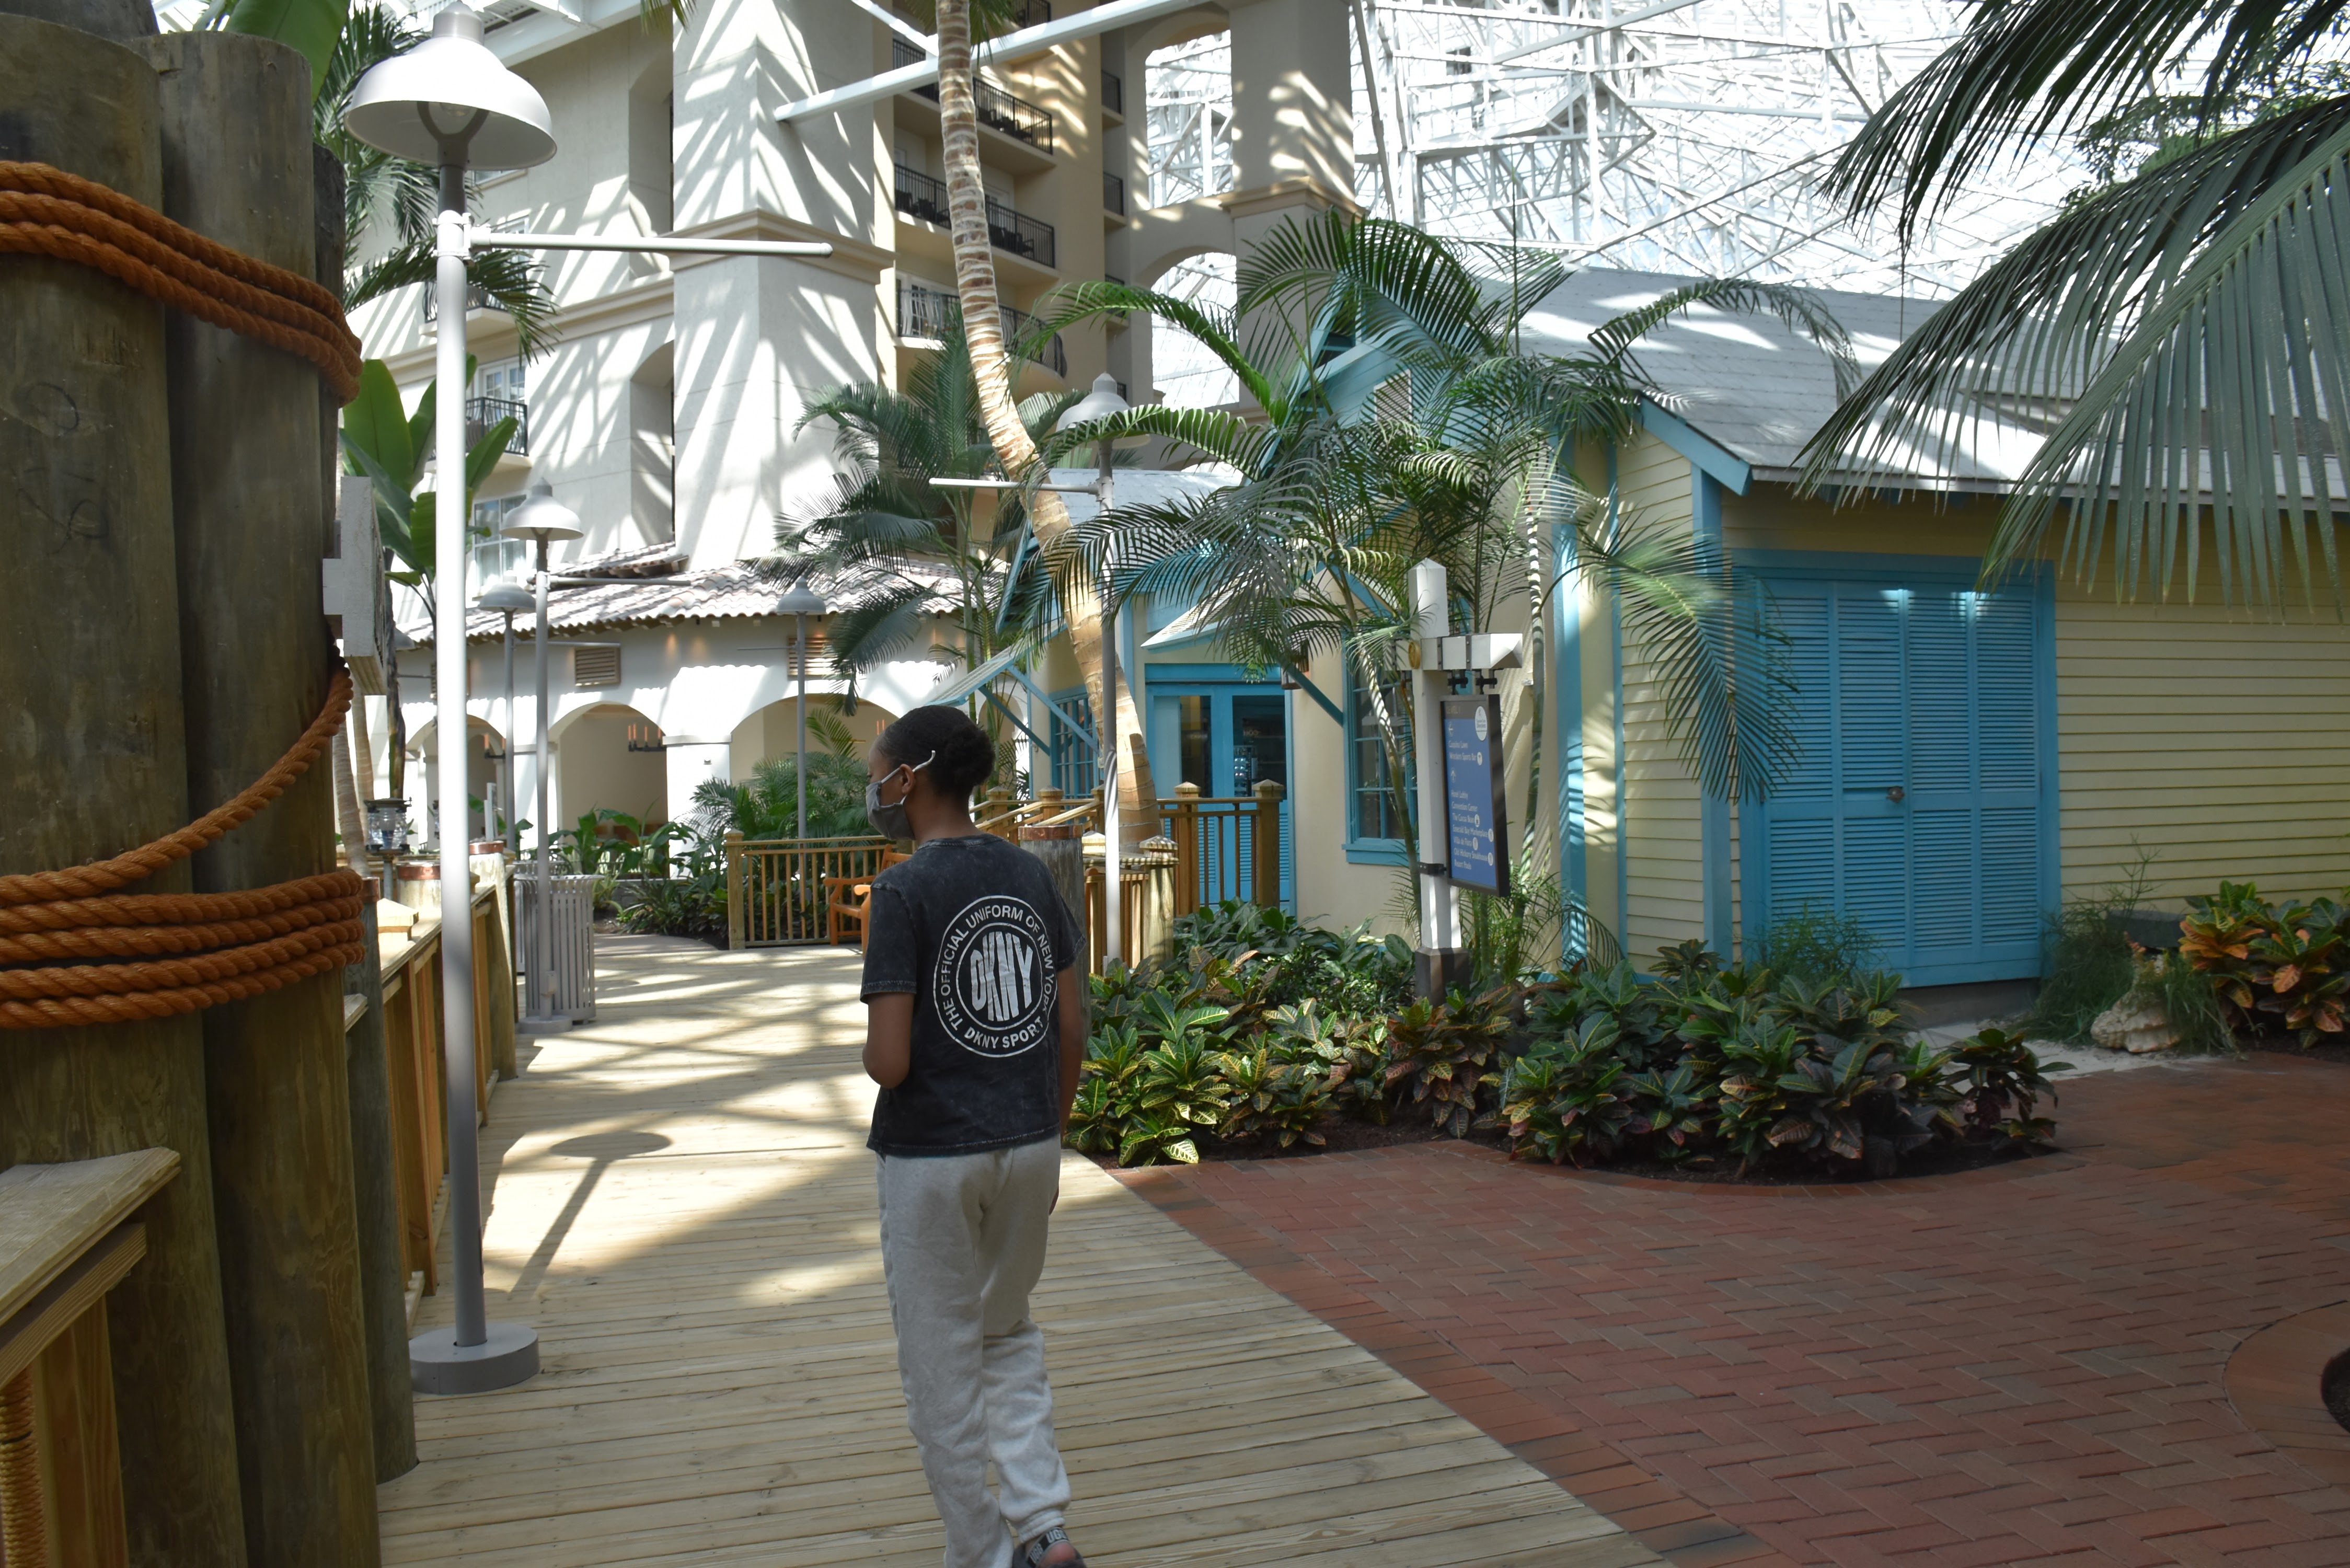 Inside the Gaylord Palms